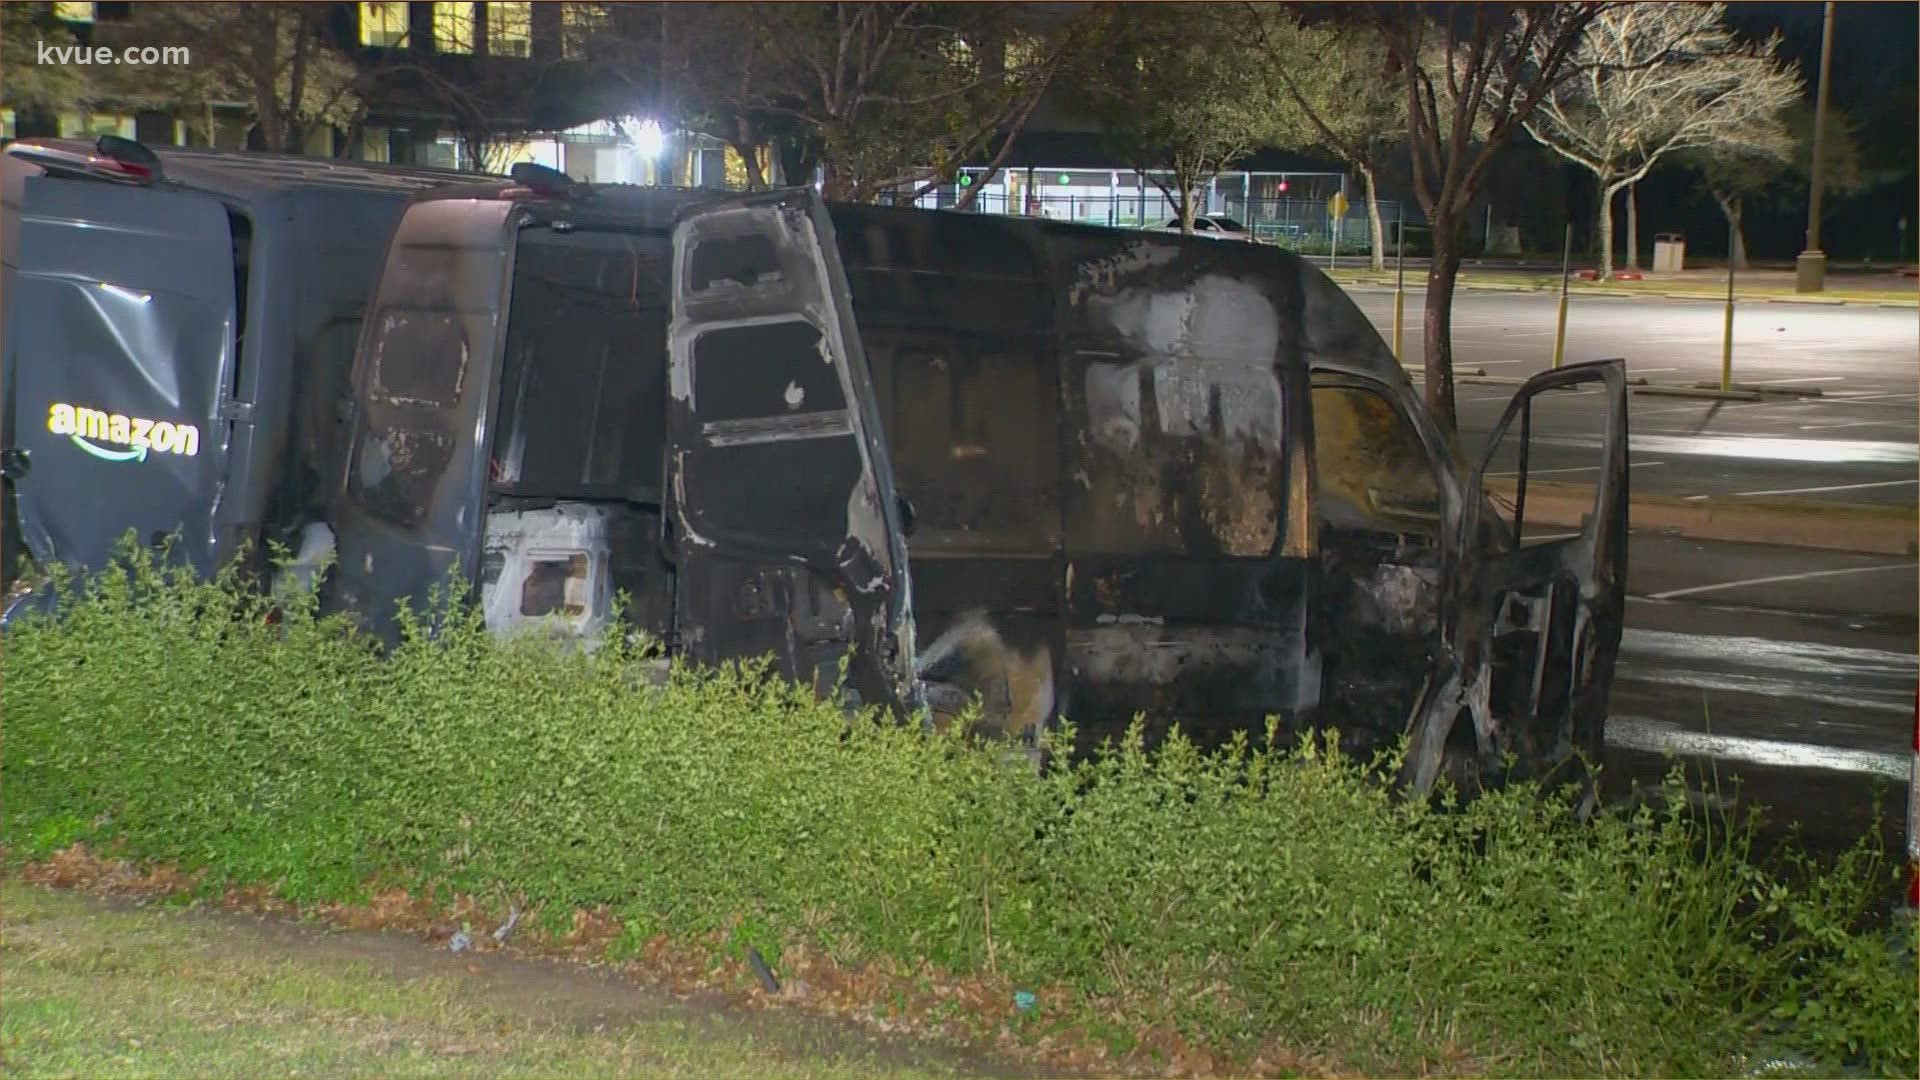 The Austin Fire Department is investigating a fire that damaged multiple Amazon delivery vans in northeast Austin.